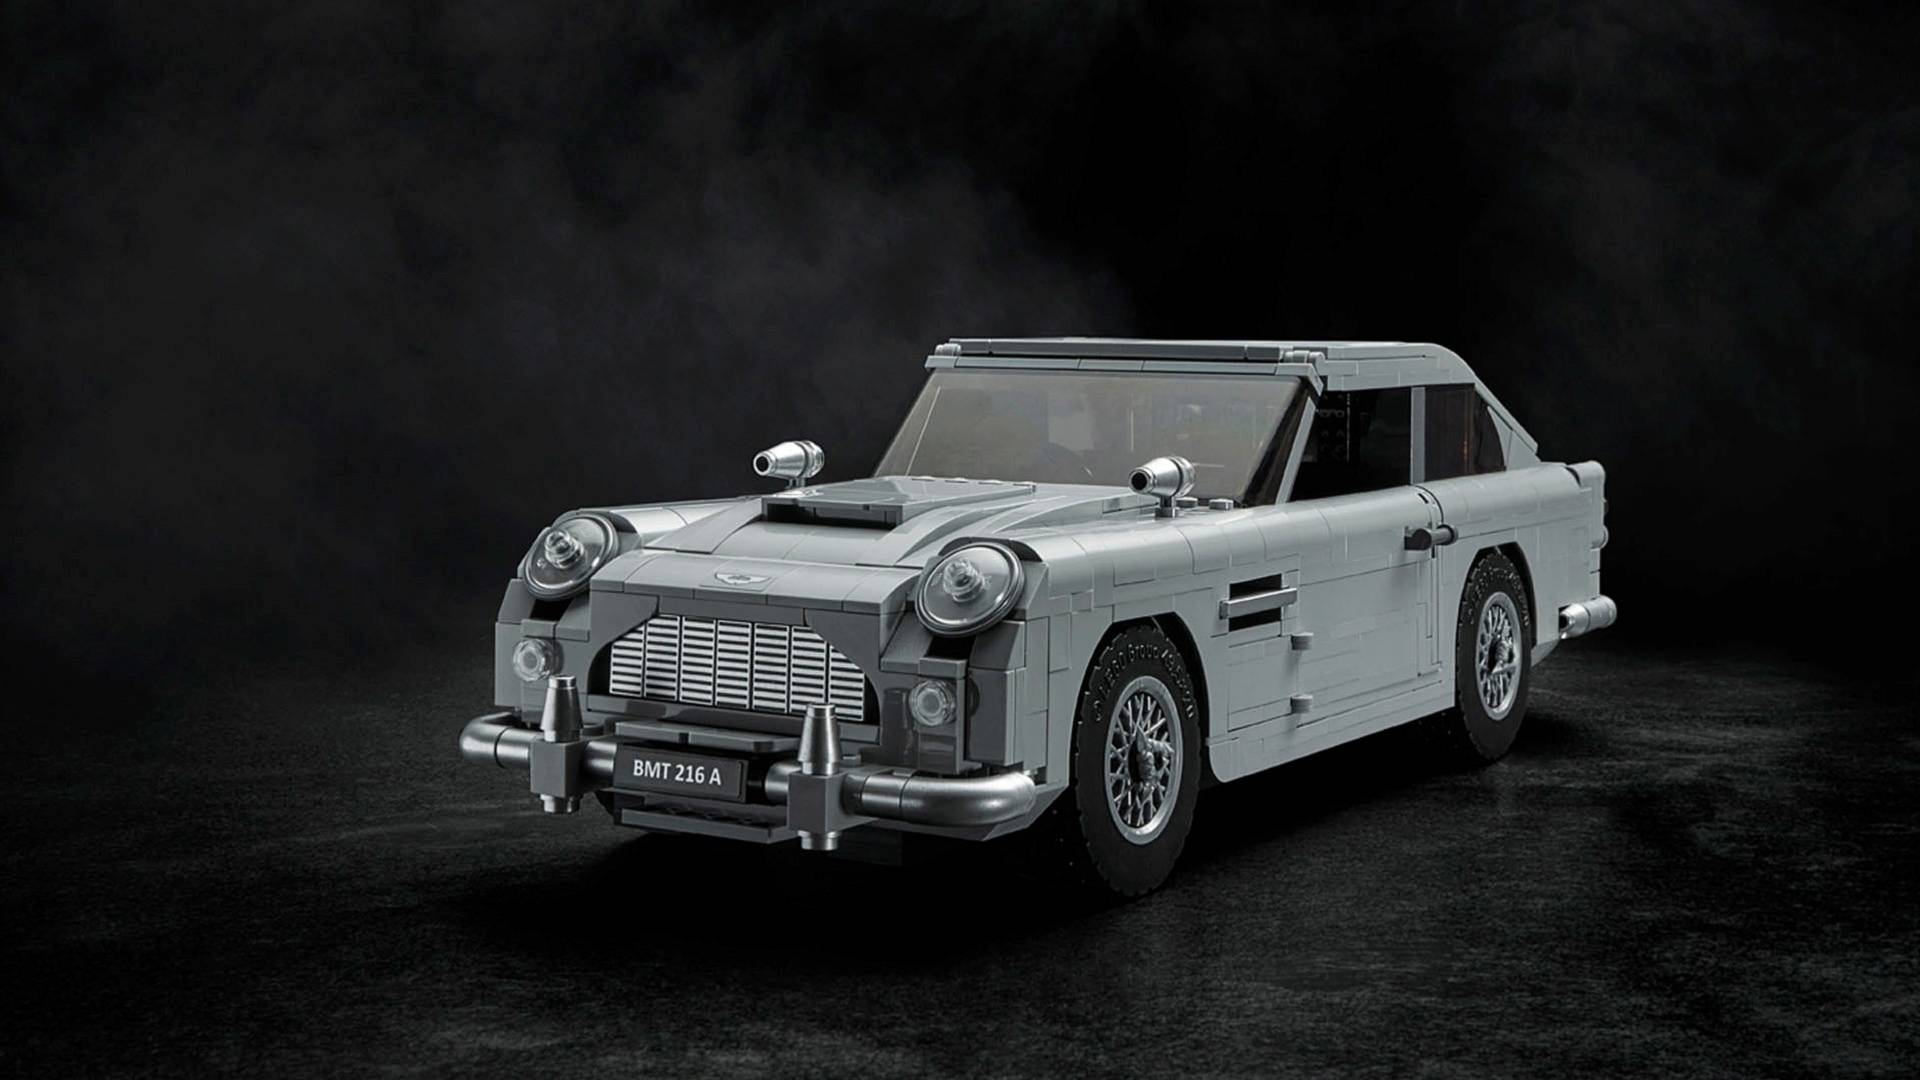 Lego's newest license is for James Bond's classic Aston Martin DB5